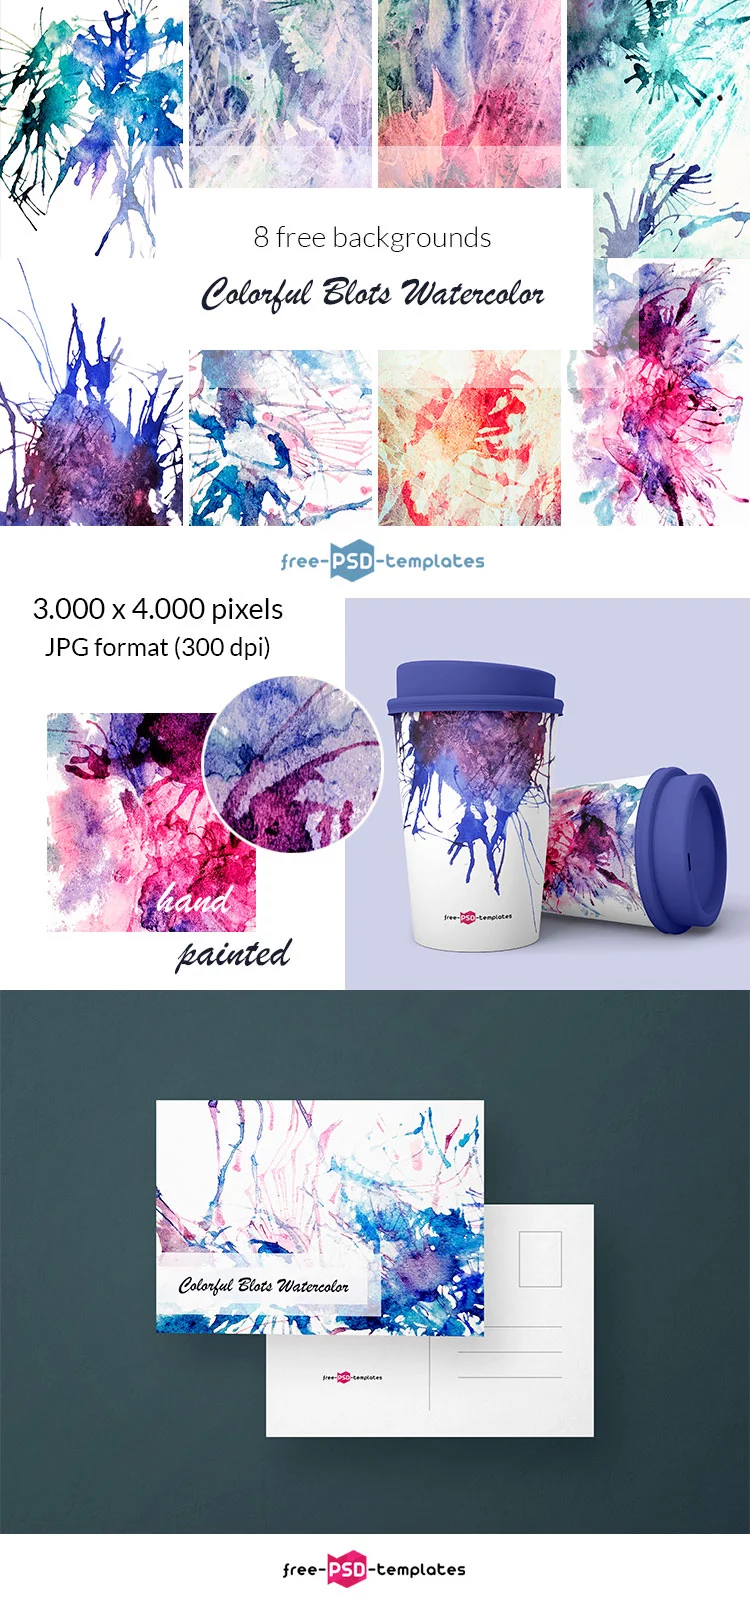 Free Colorful Blots Watercolor Background